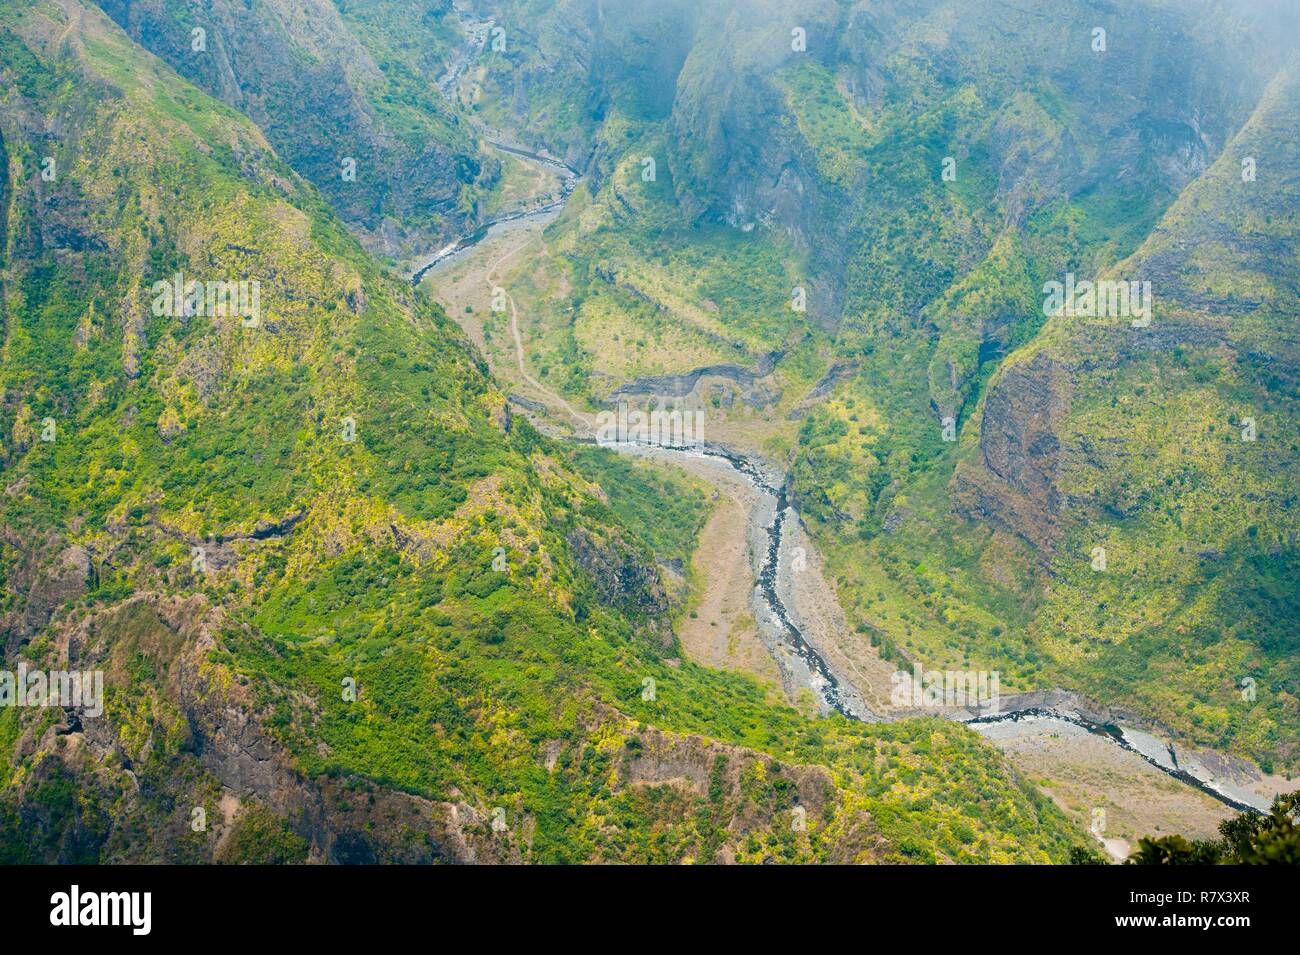 France, Reunion island, Saint Paul, the Galets river in the Mafate cirque, listed as World Heritage by UNESCO Stock Photo